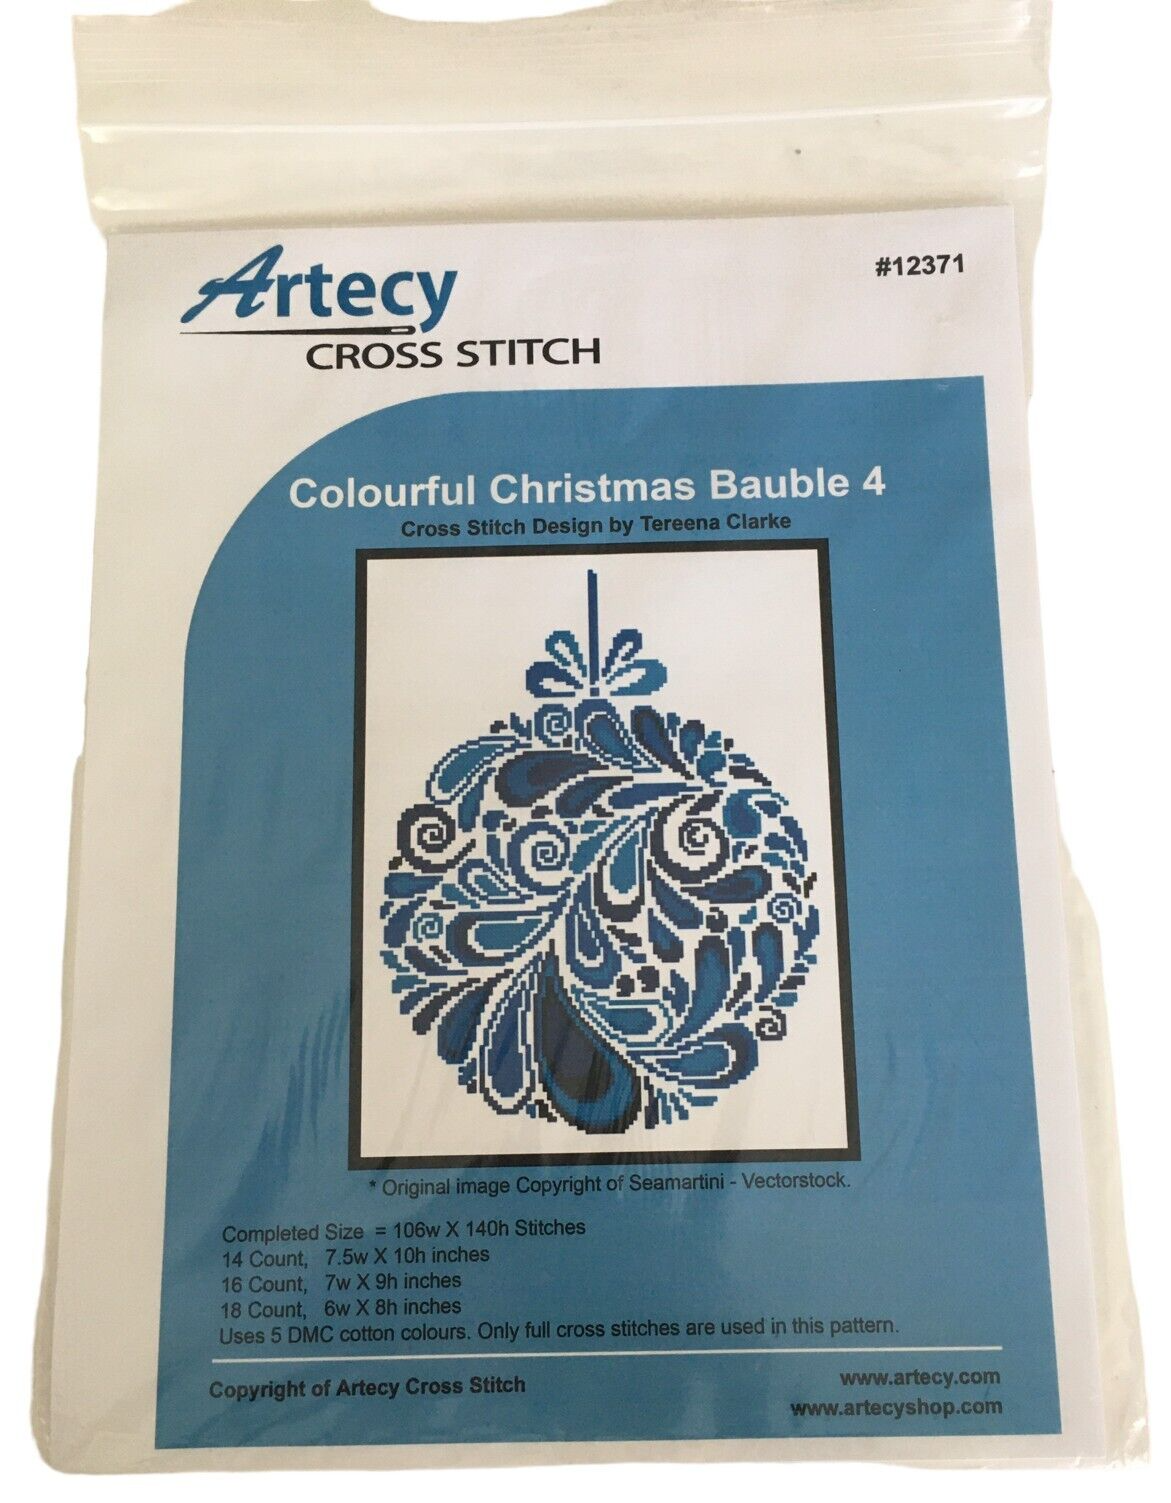 Artecy Cross Stitch Pattern Colorful Christmas Bauble 4 Holiday Ornament 12371 - $9.99